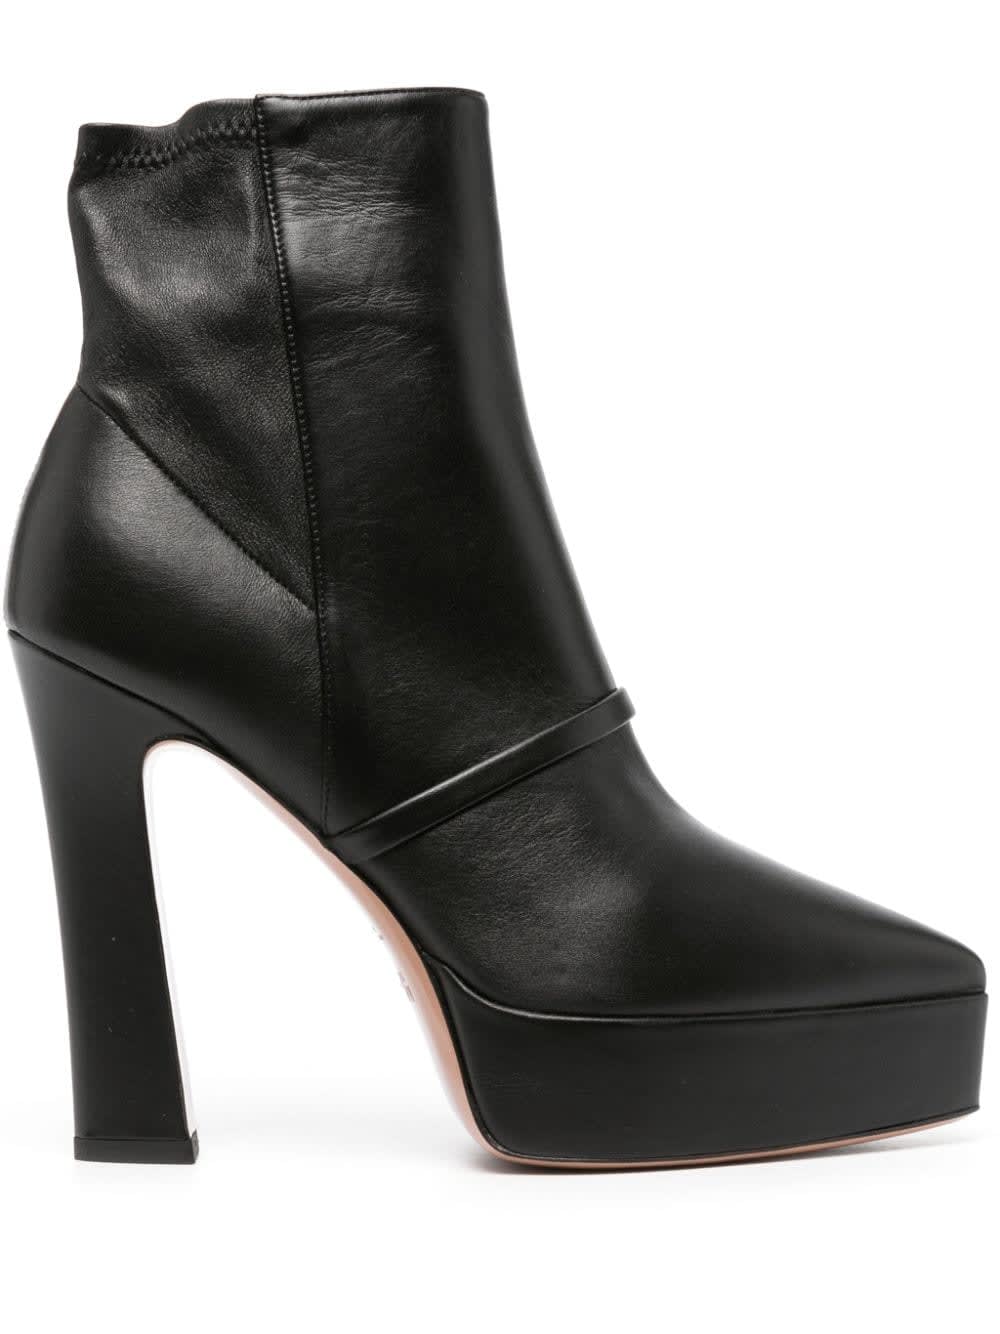 malone souliers rue 125 high heel ankle boots